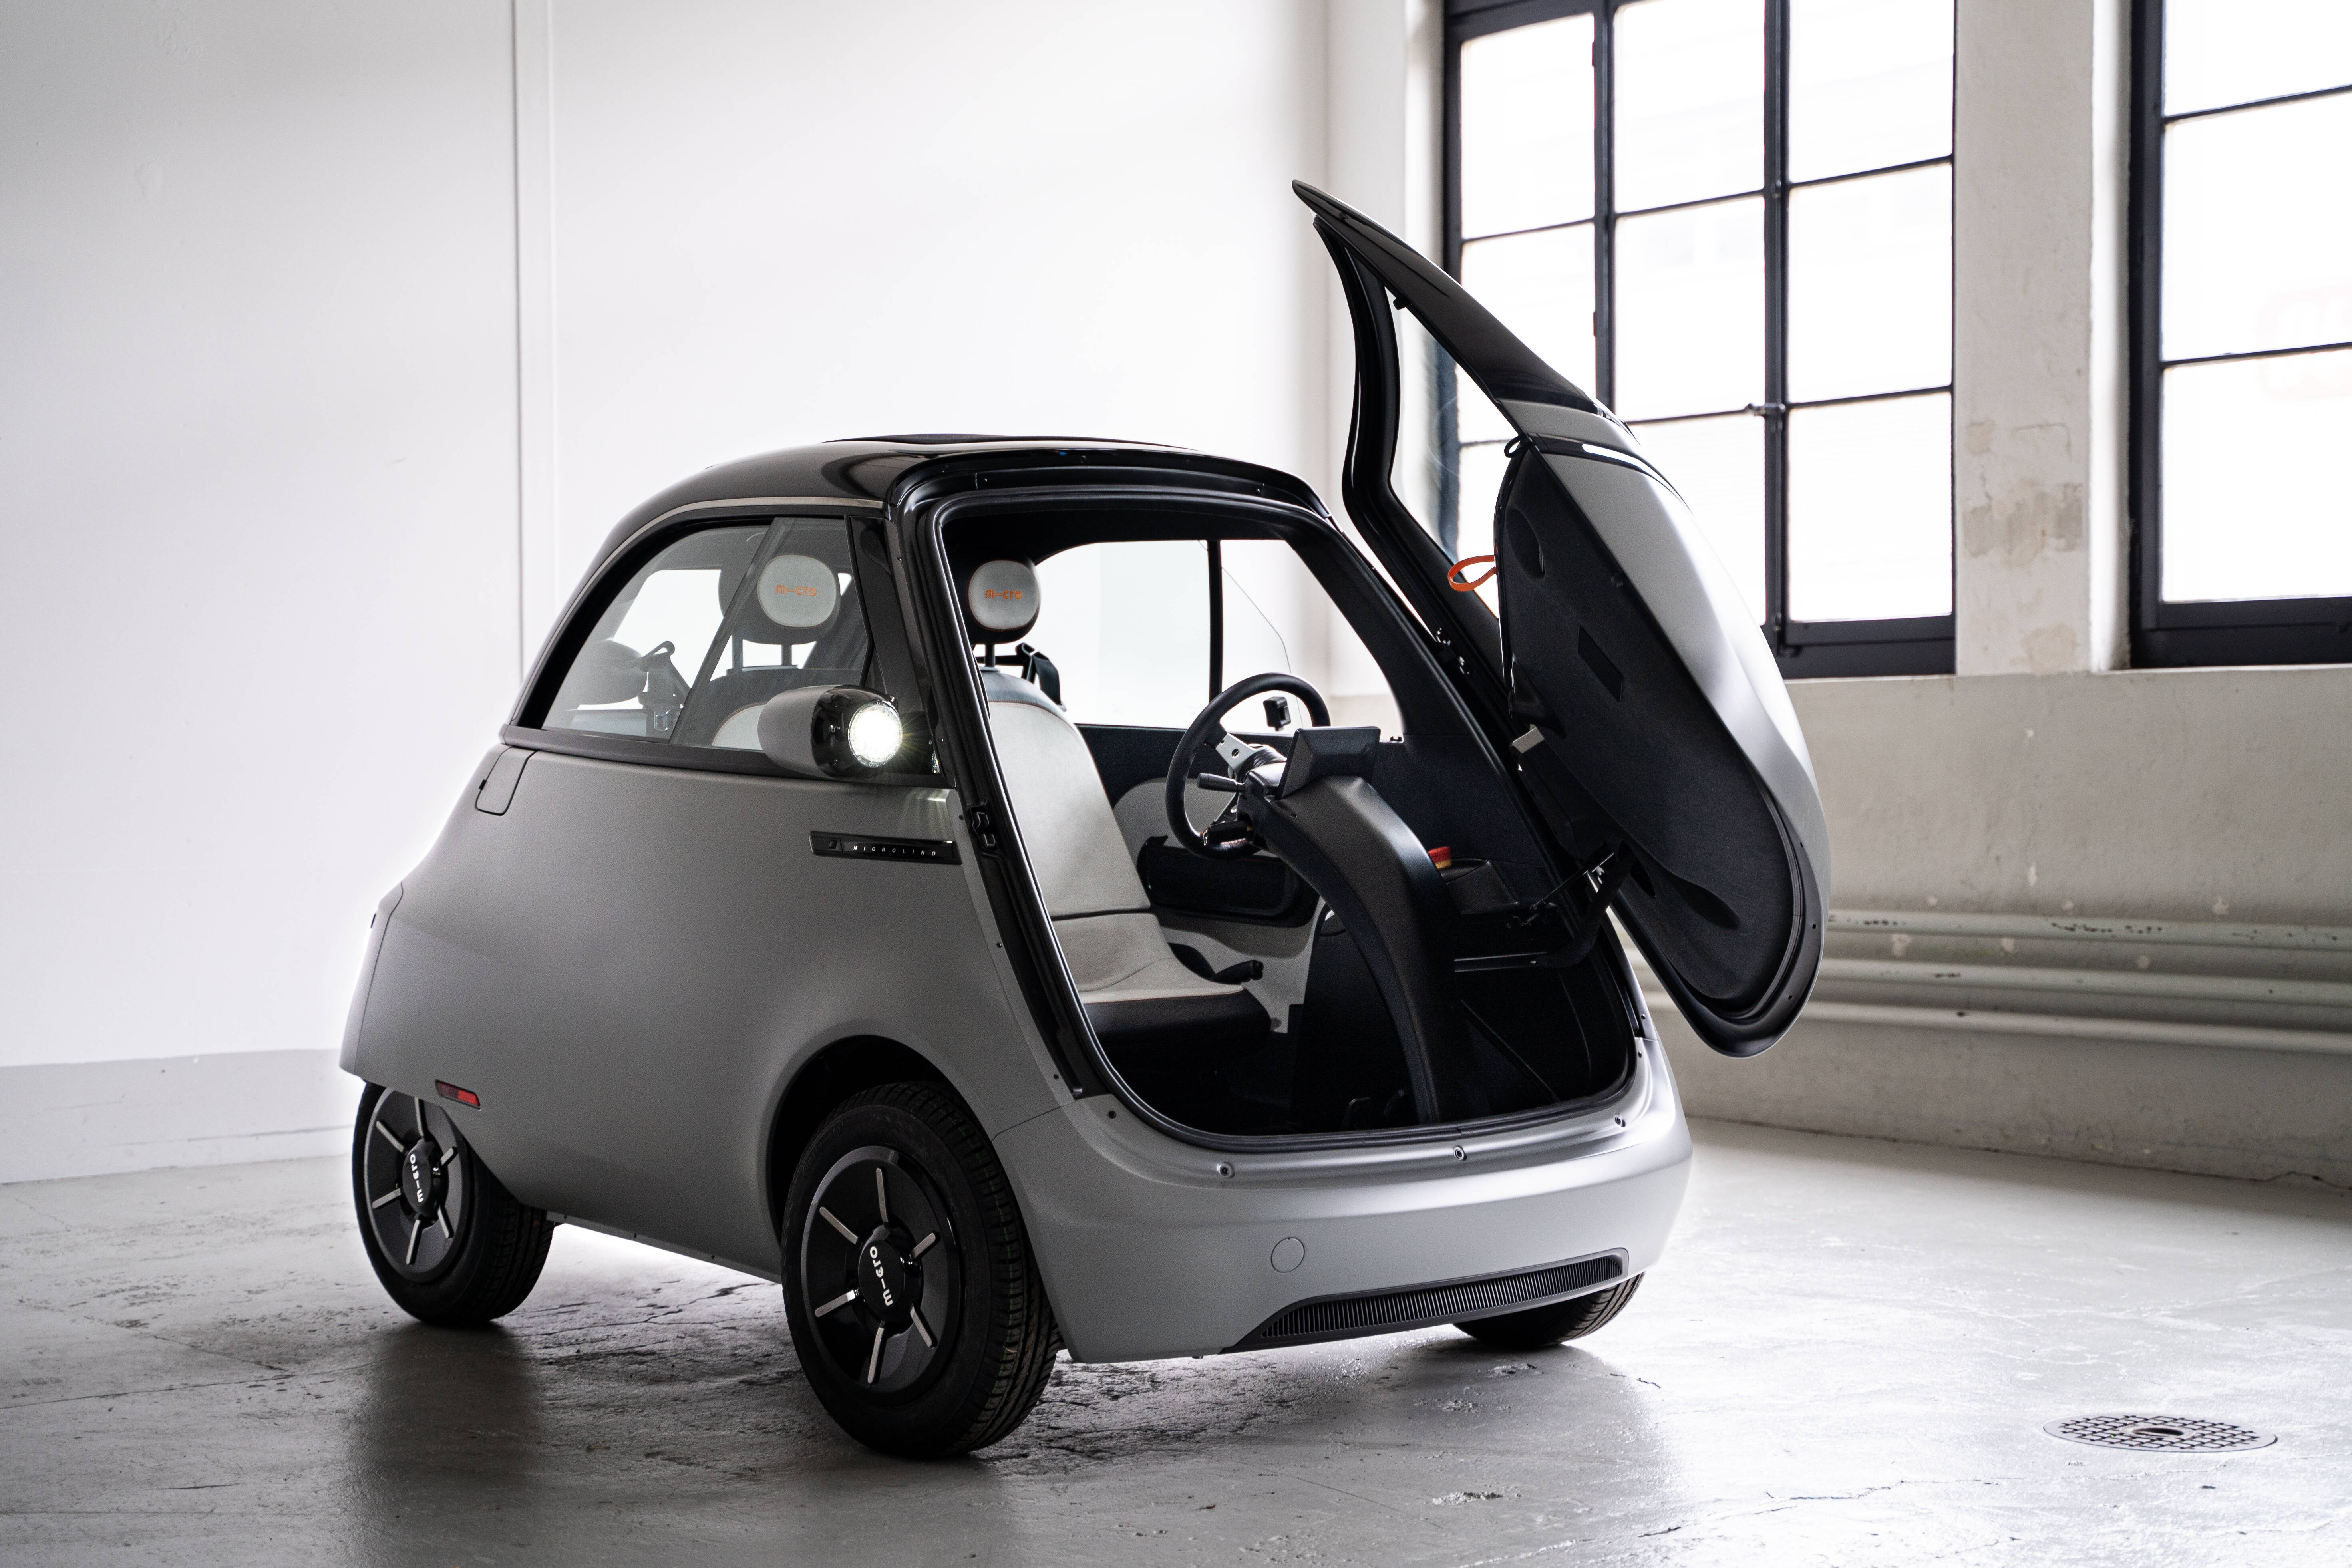 Microlino on supply chains and electric vehicle assembly • The Register